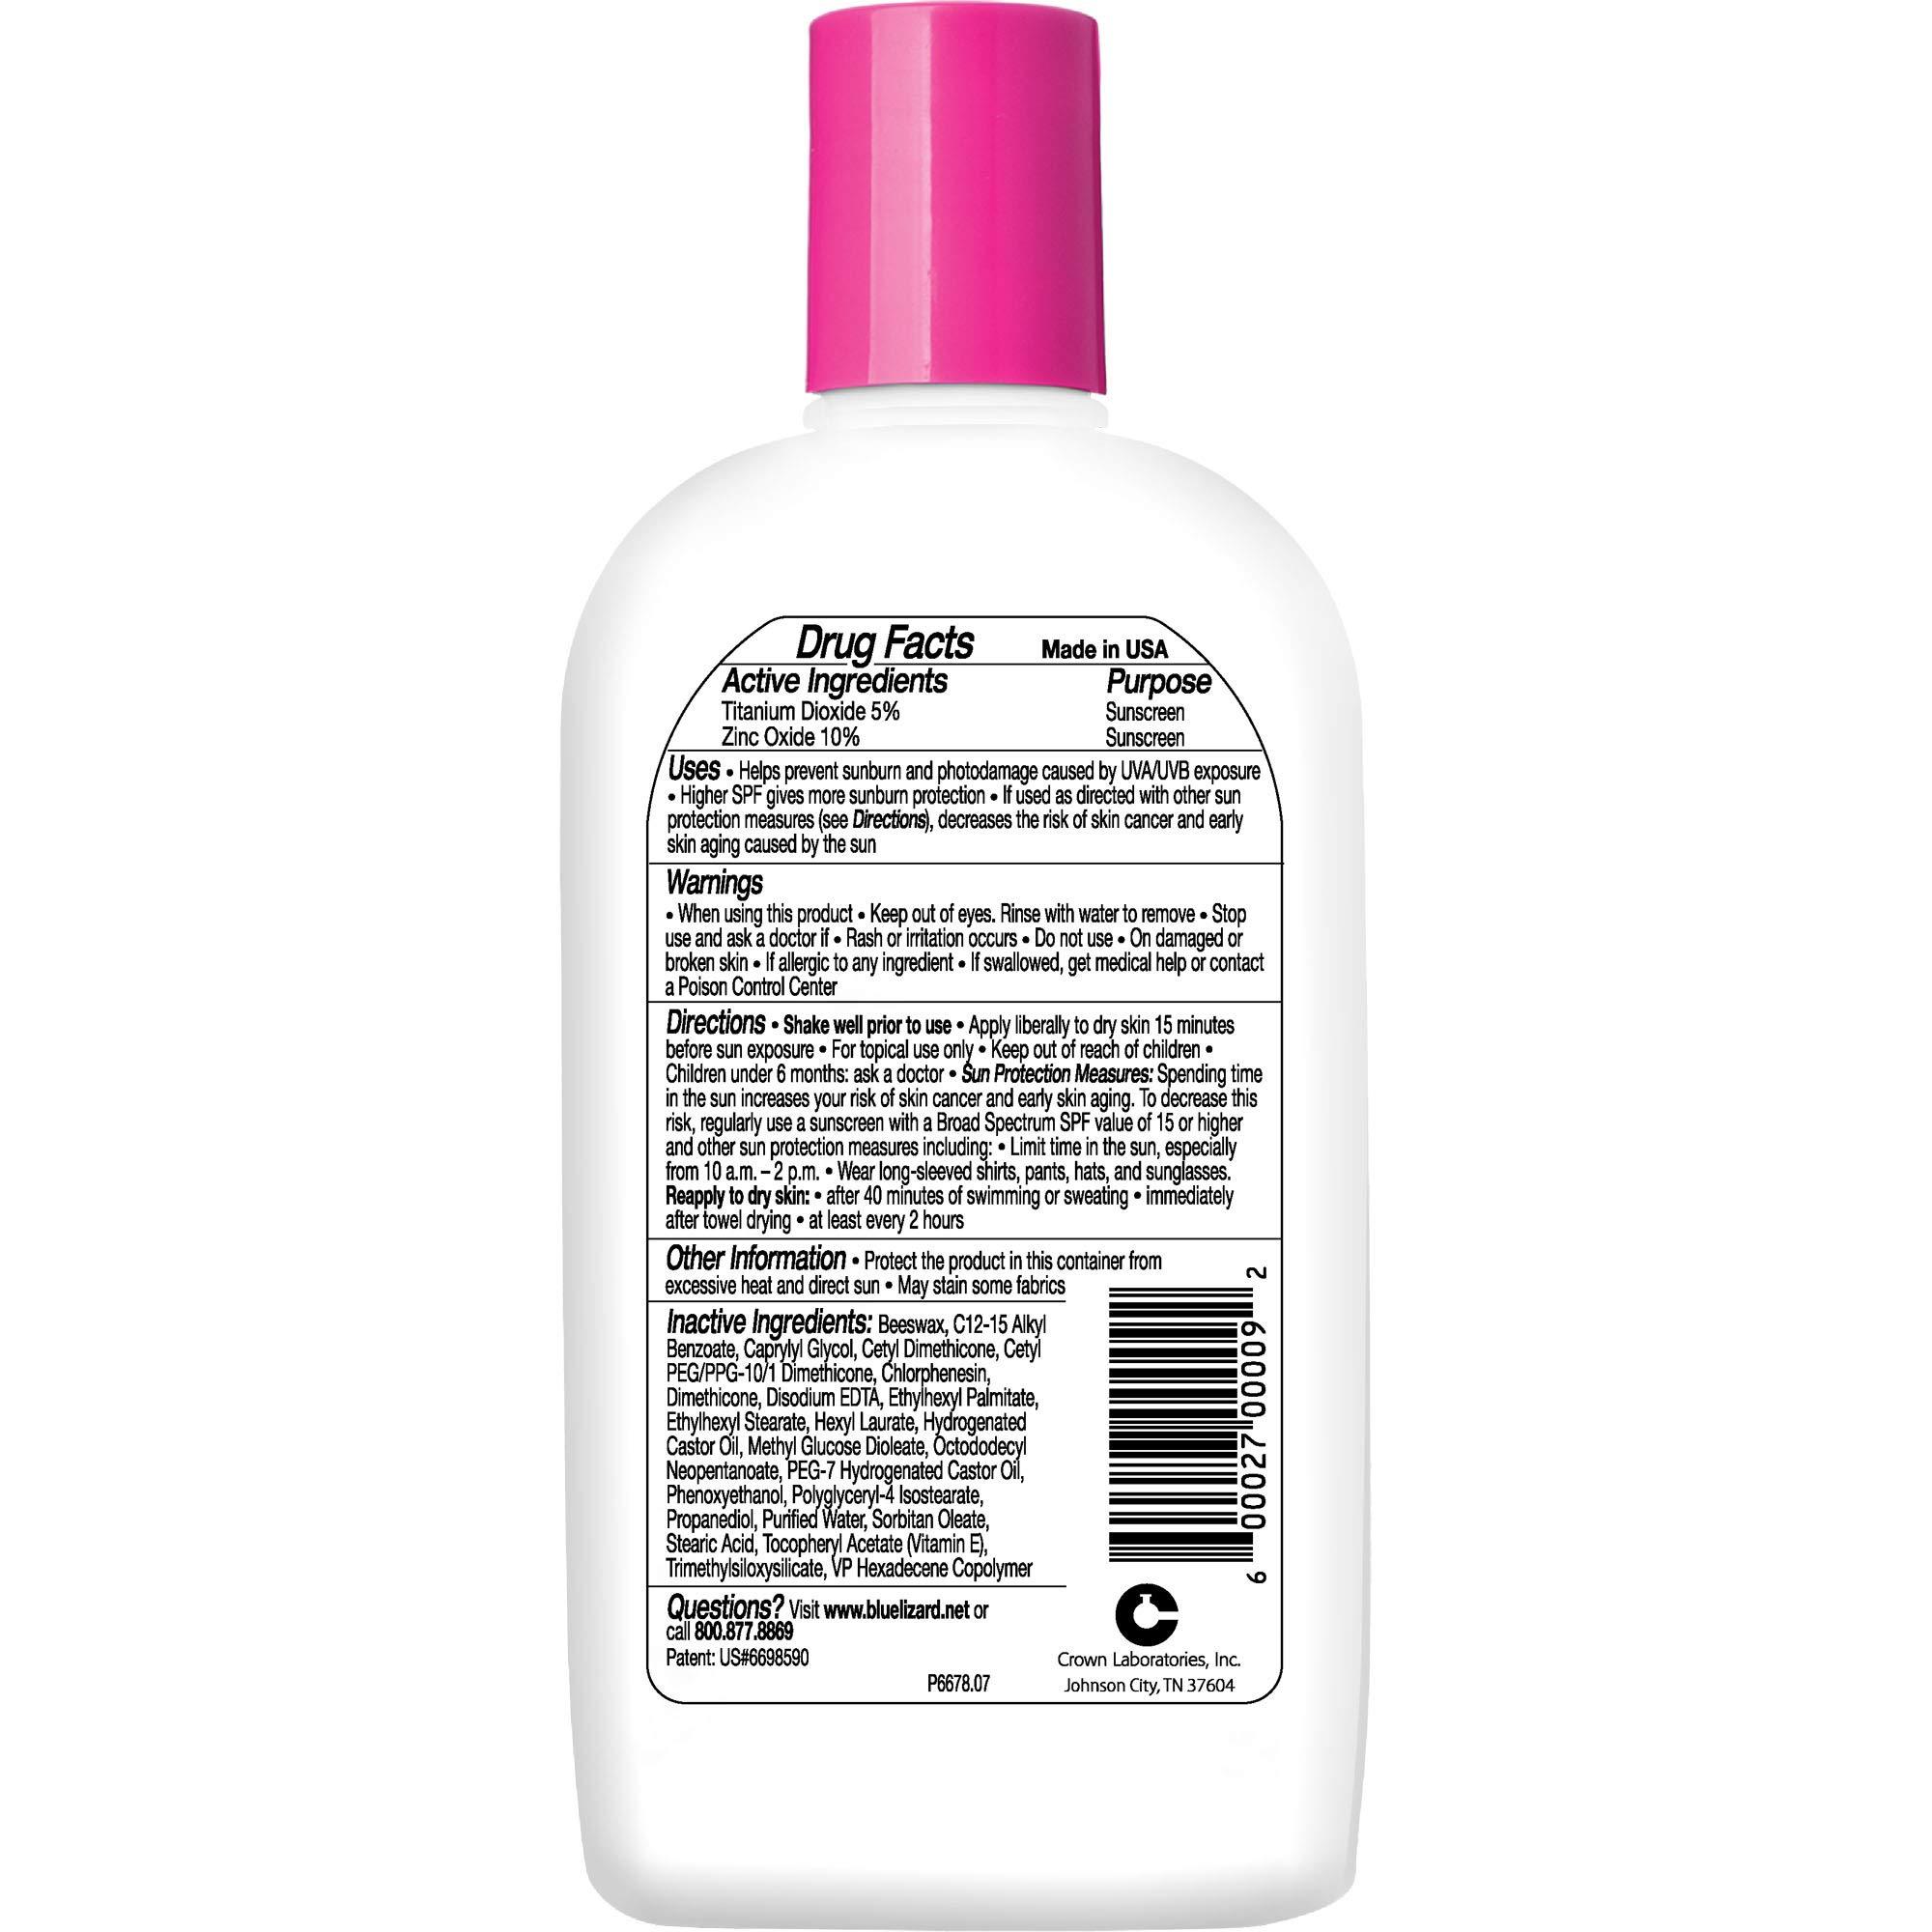 Blue Lizard Baby Mineral Sunscreen with No Chemical Ingredients SPF 30 UVA/UVB Protection, 5 oz Bottle 5 Fl. Oz - image 2 of 3